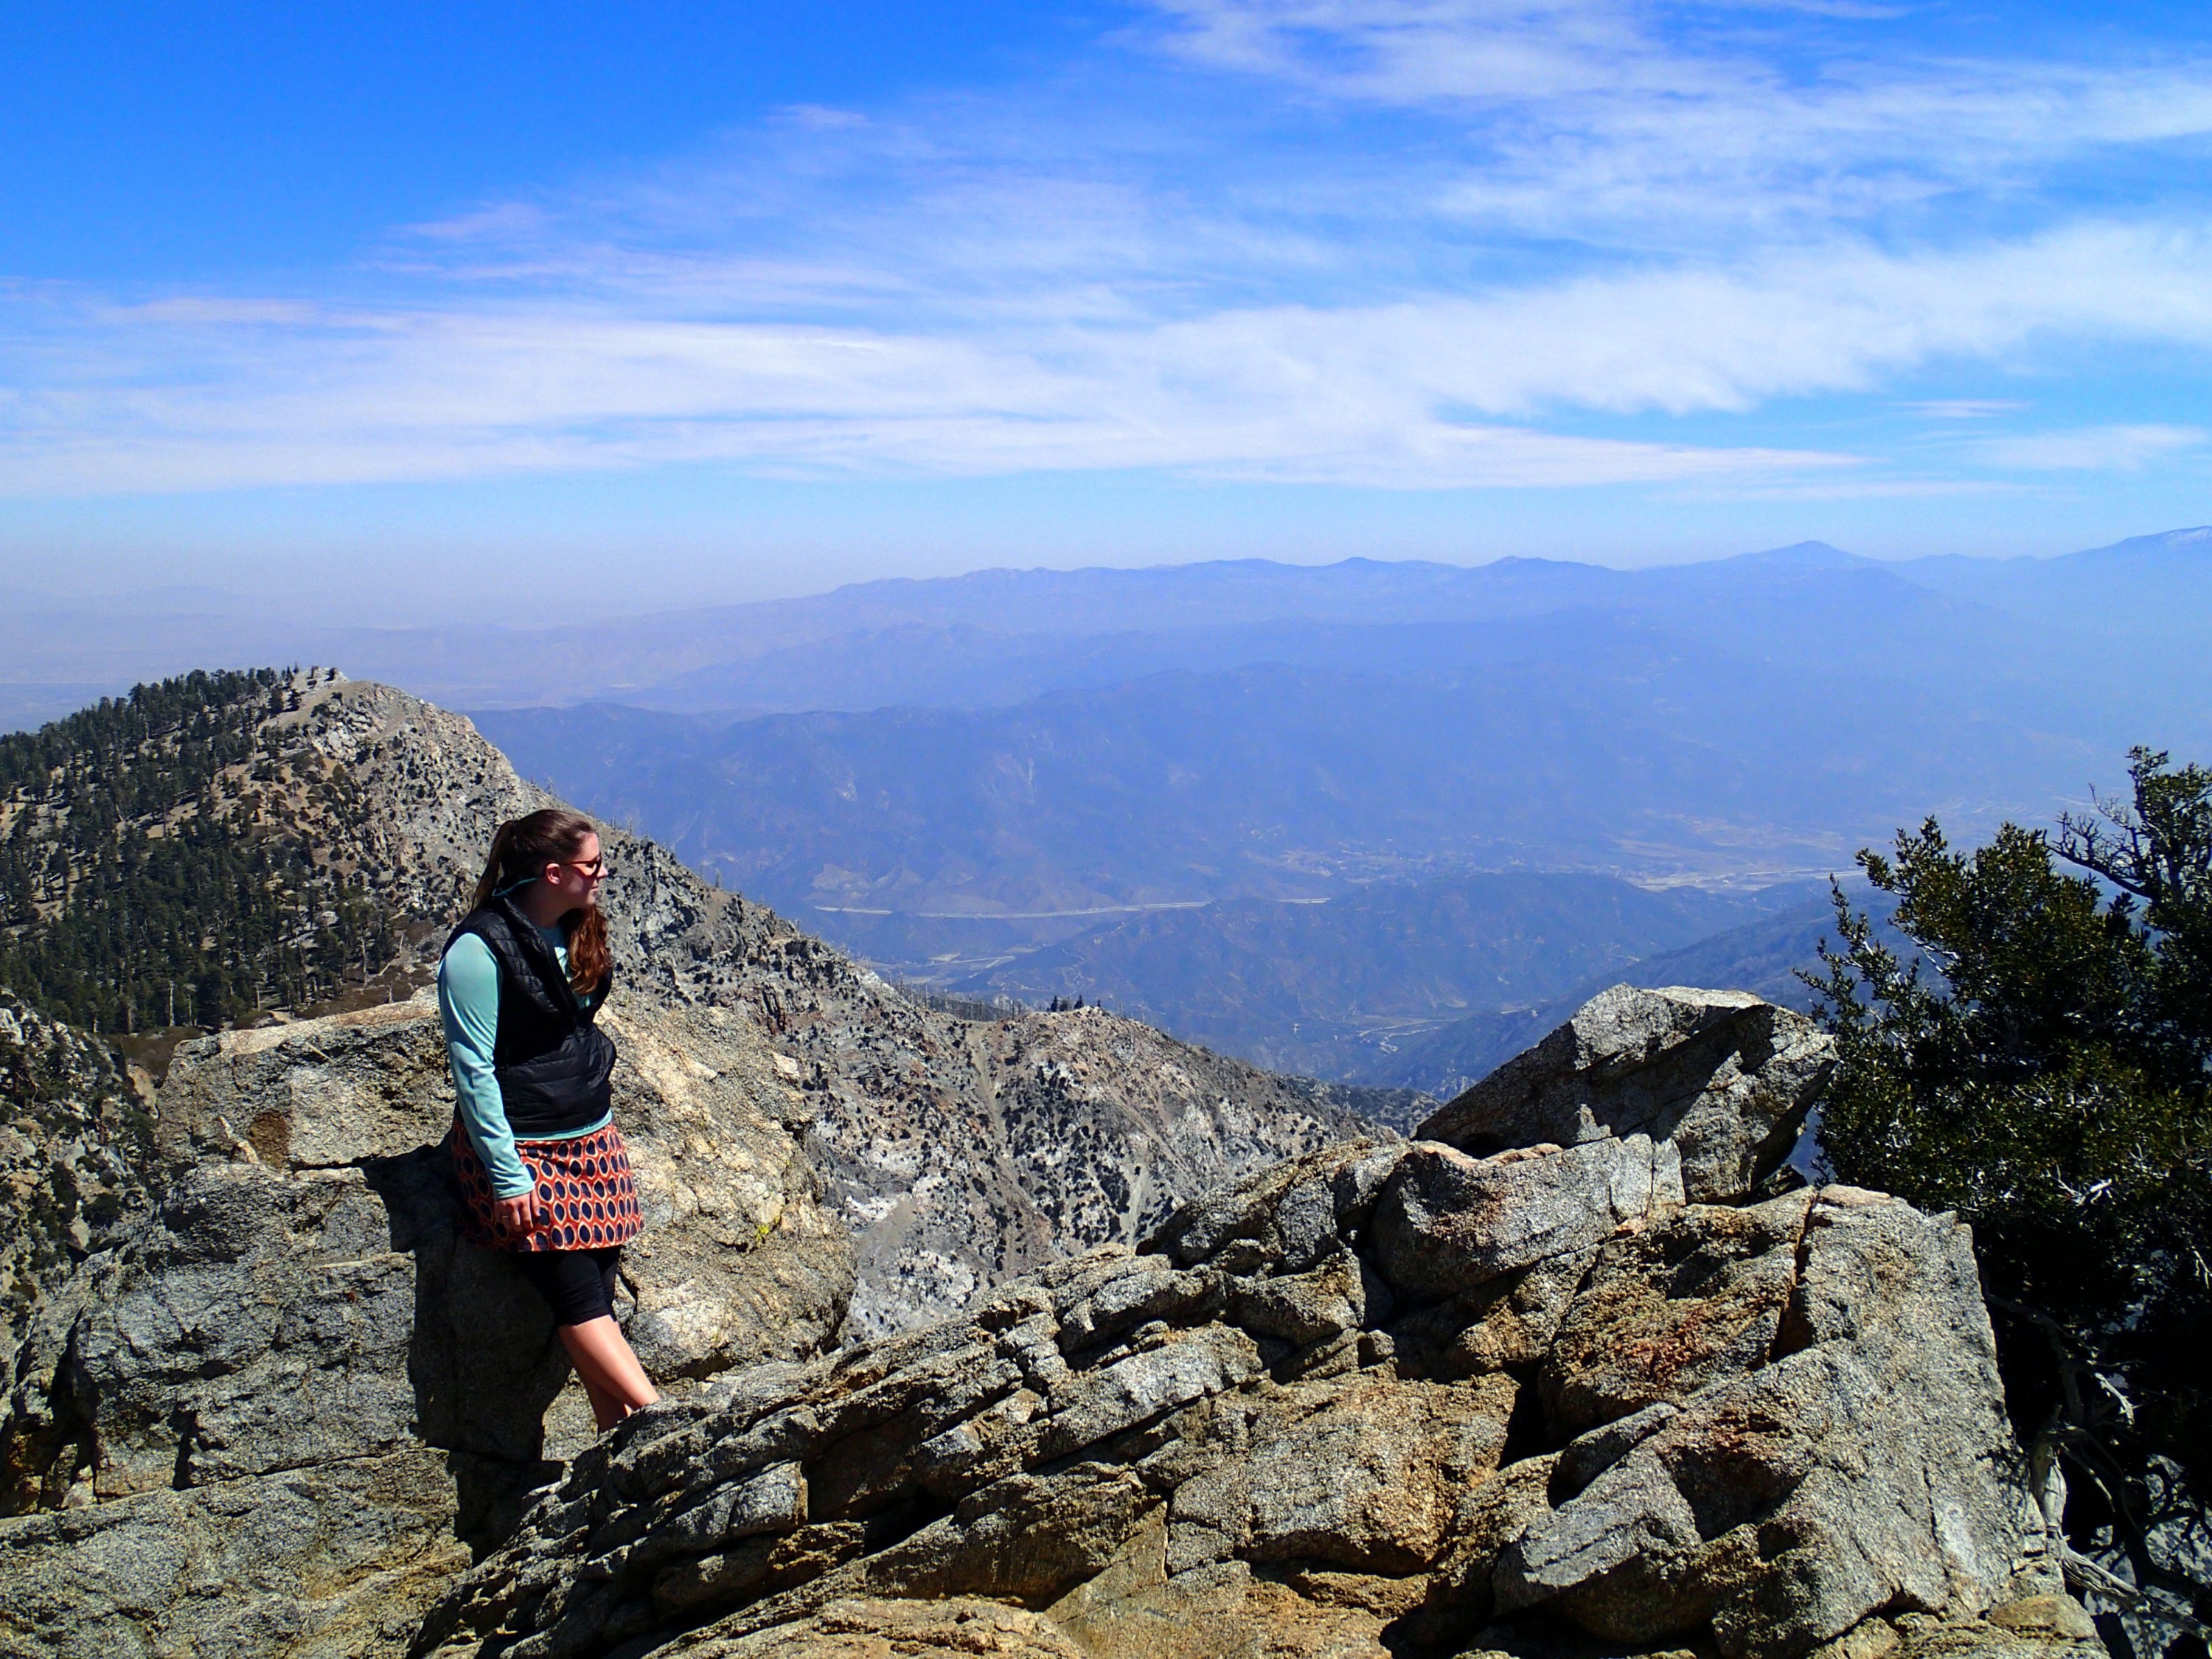 Dani taking in the breathtaking view after ascending Cucamonga Peak in her native California.